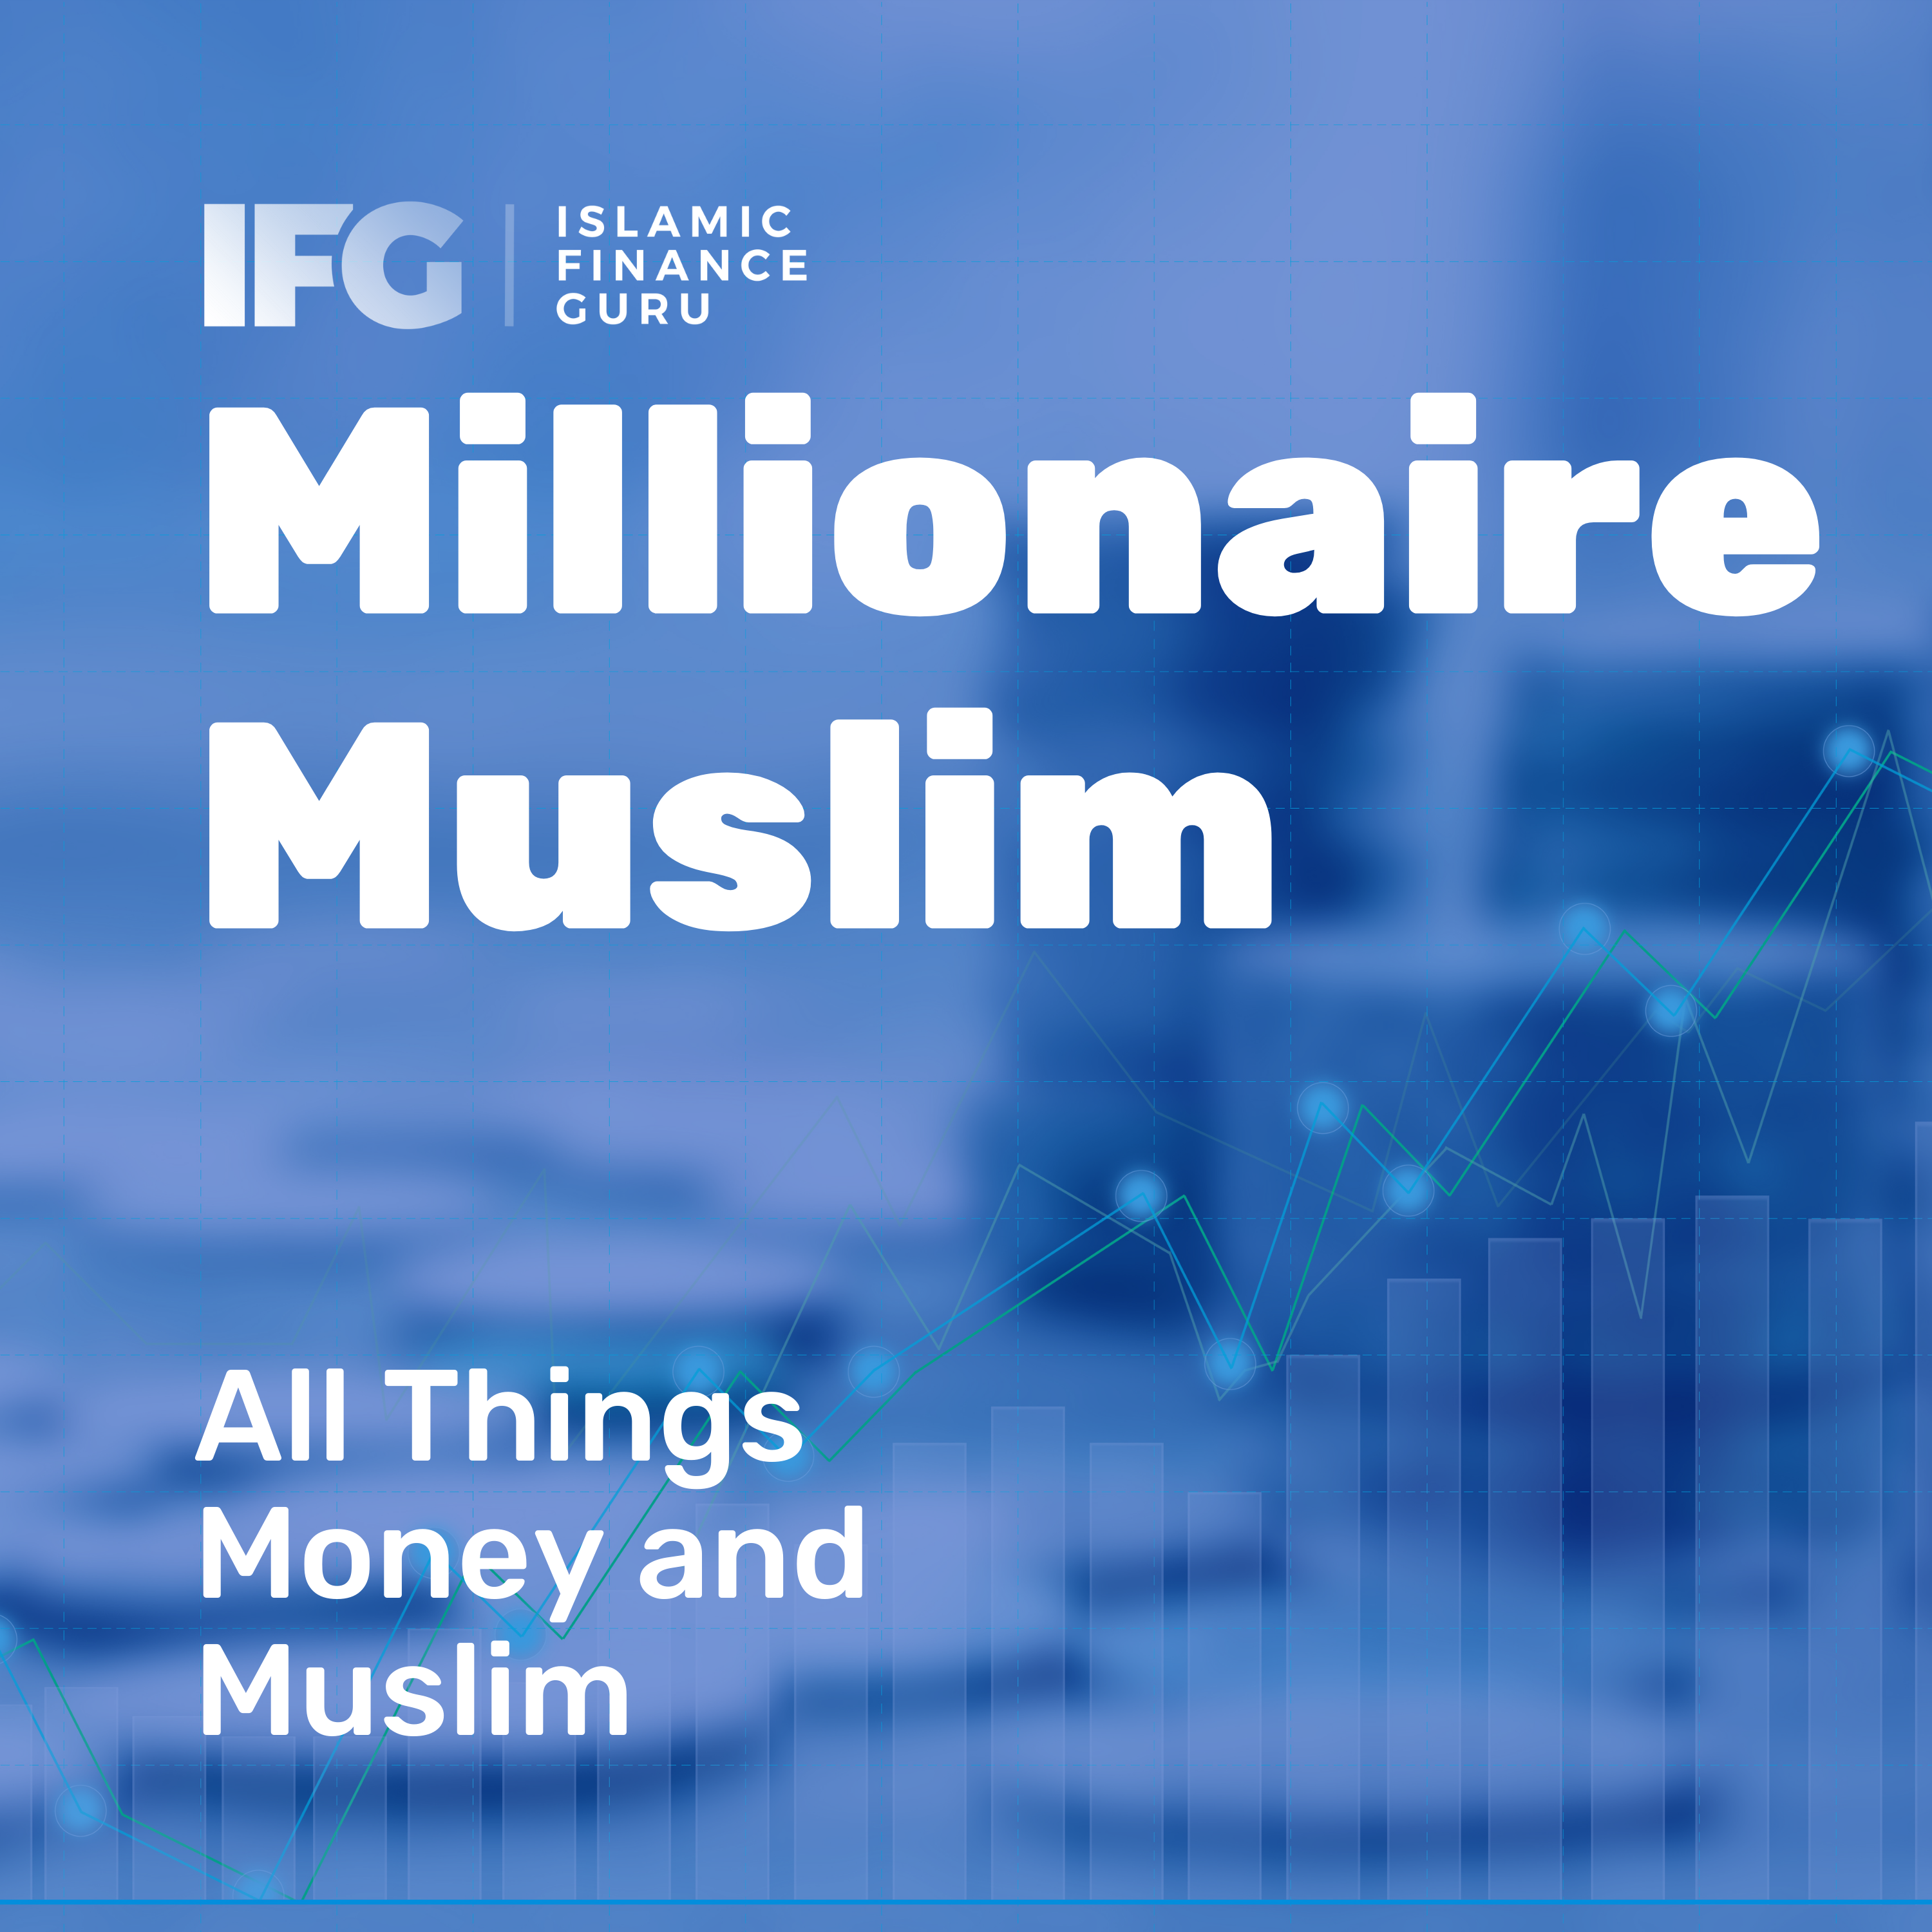 E20 Podcast: NZF – 0 to £3.5m – CEO Iqbal Nasim | IFG Featured Image